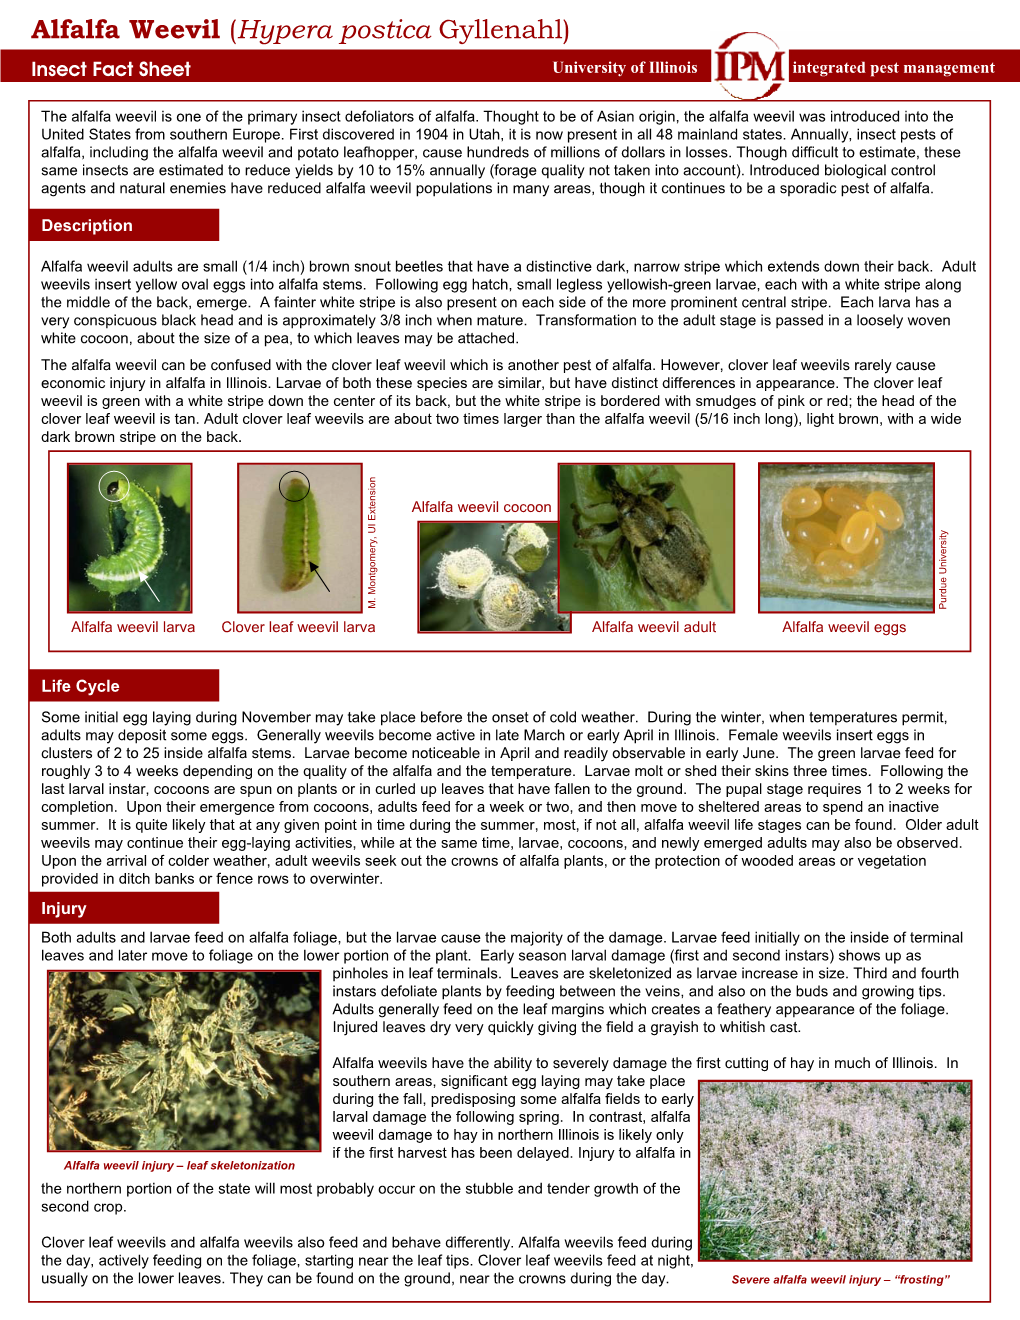 Alfalfa Weevil (Hypera Postica Gyllenahl) Insect Fact Sheet University of Illinois Integrated Pest Management